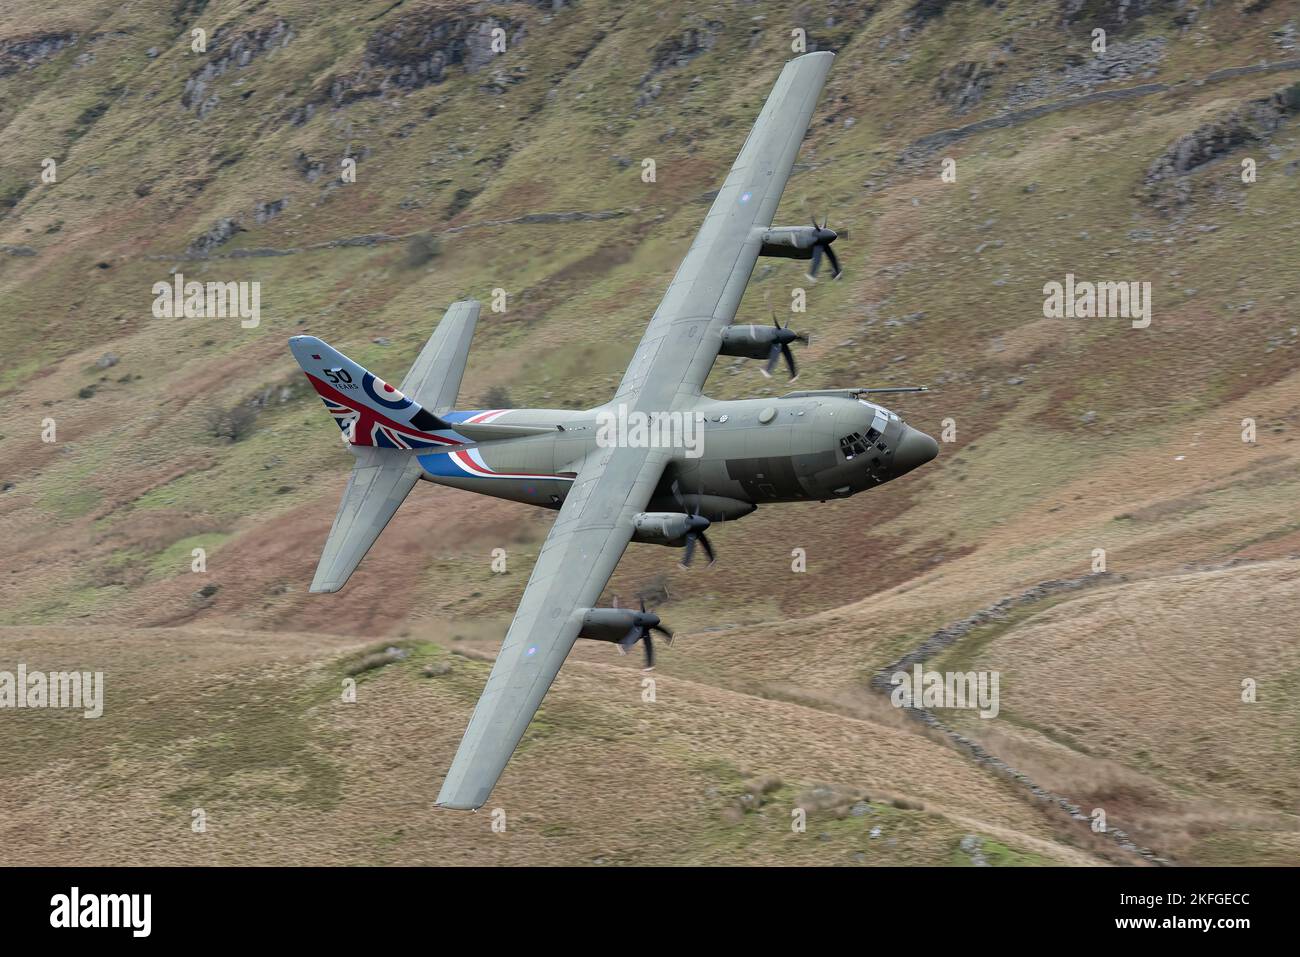 Machynlleth Wales UK. 50 year anniversary RAF Hercules flying through the Mach Loop at low level with hills in the background. Stock Photo